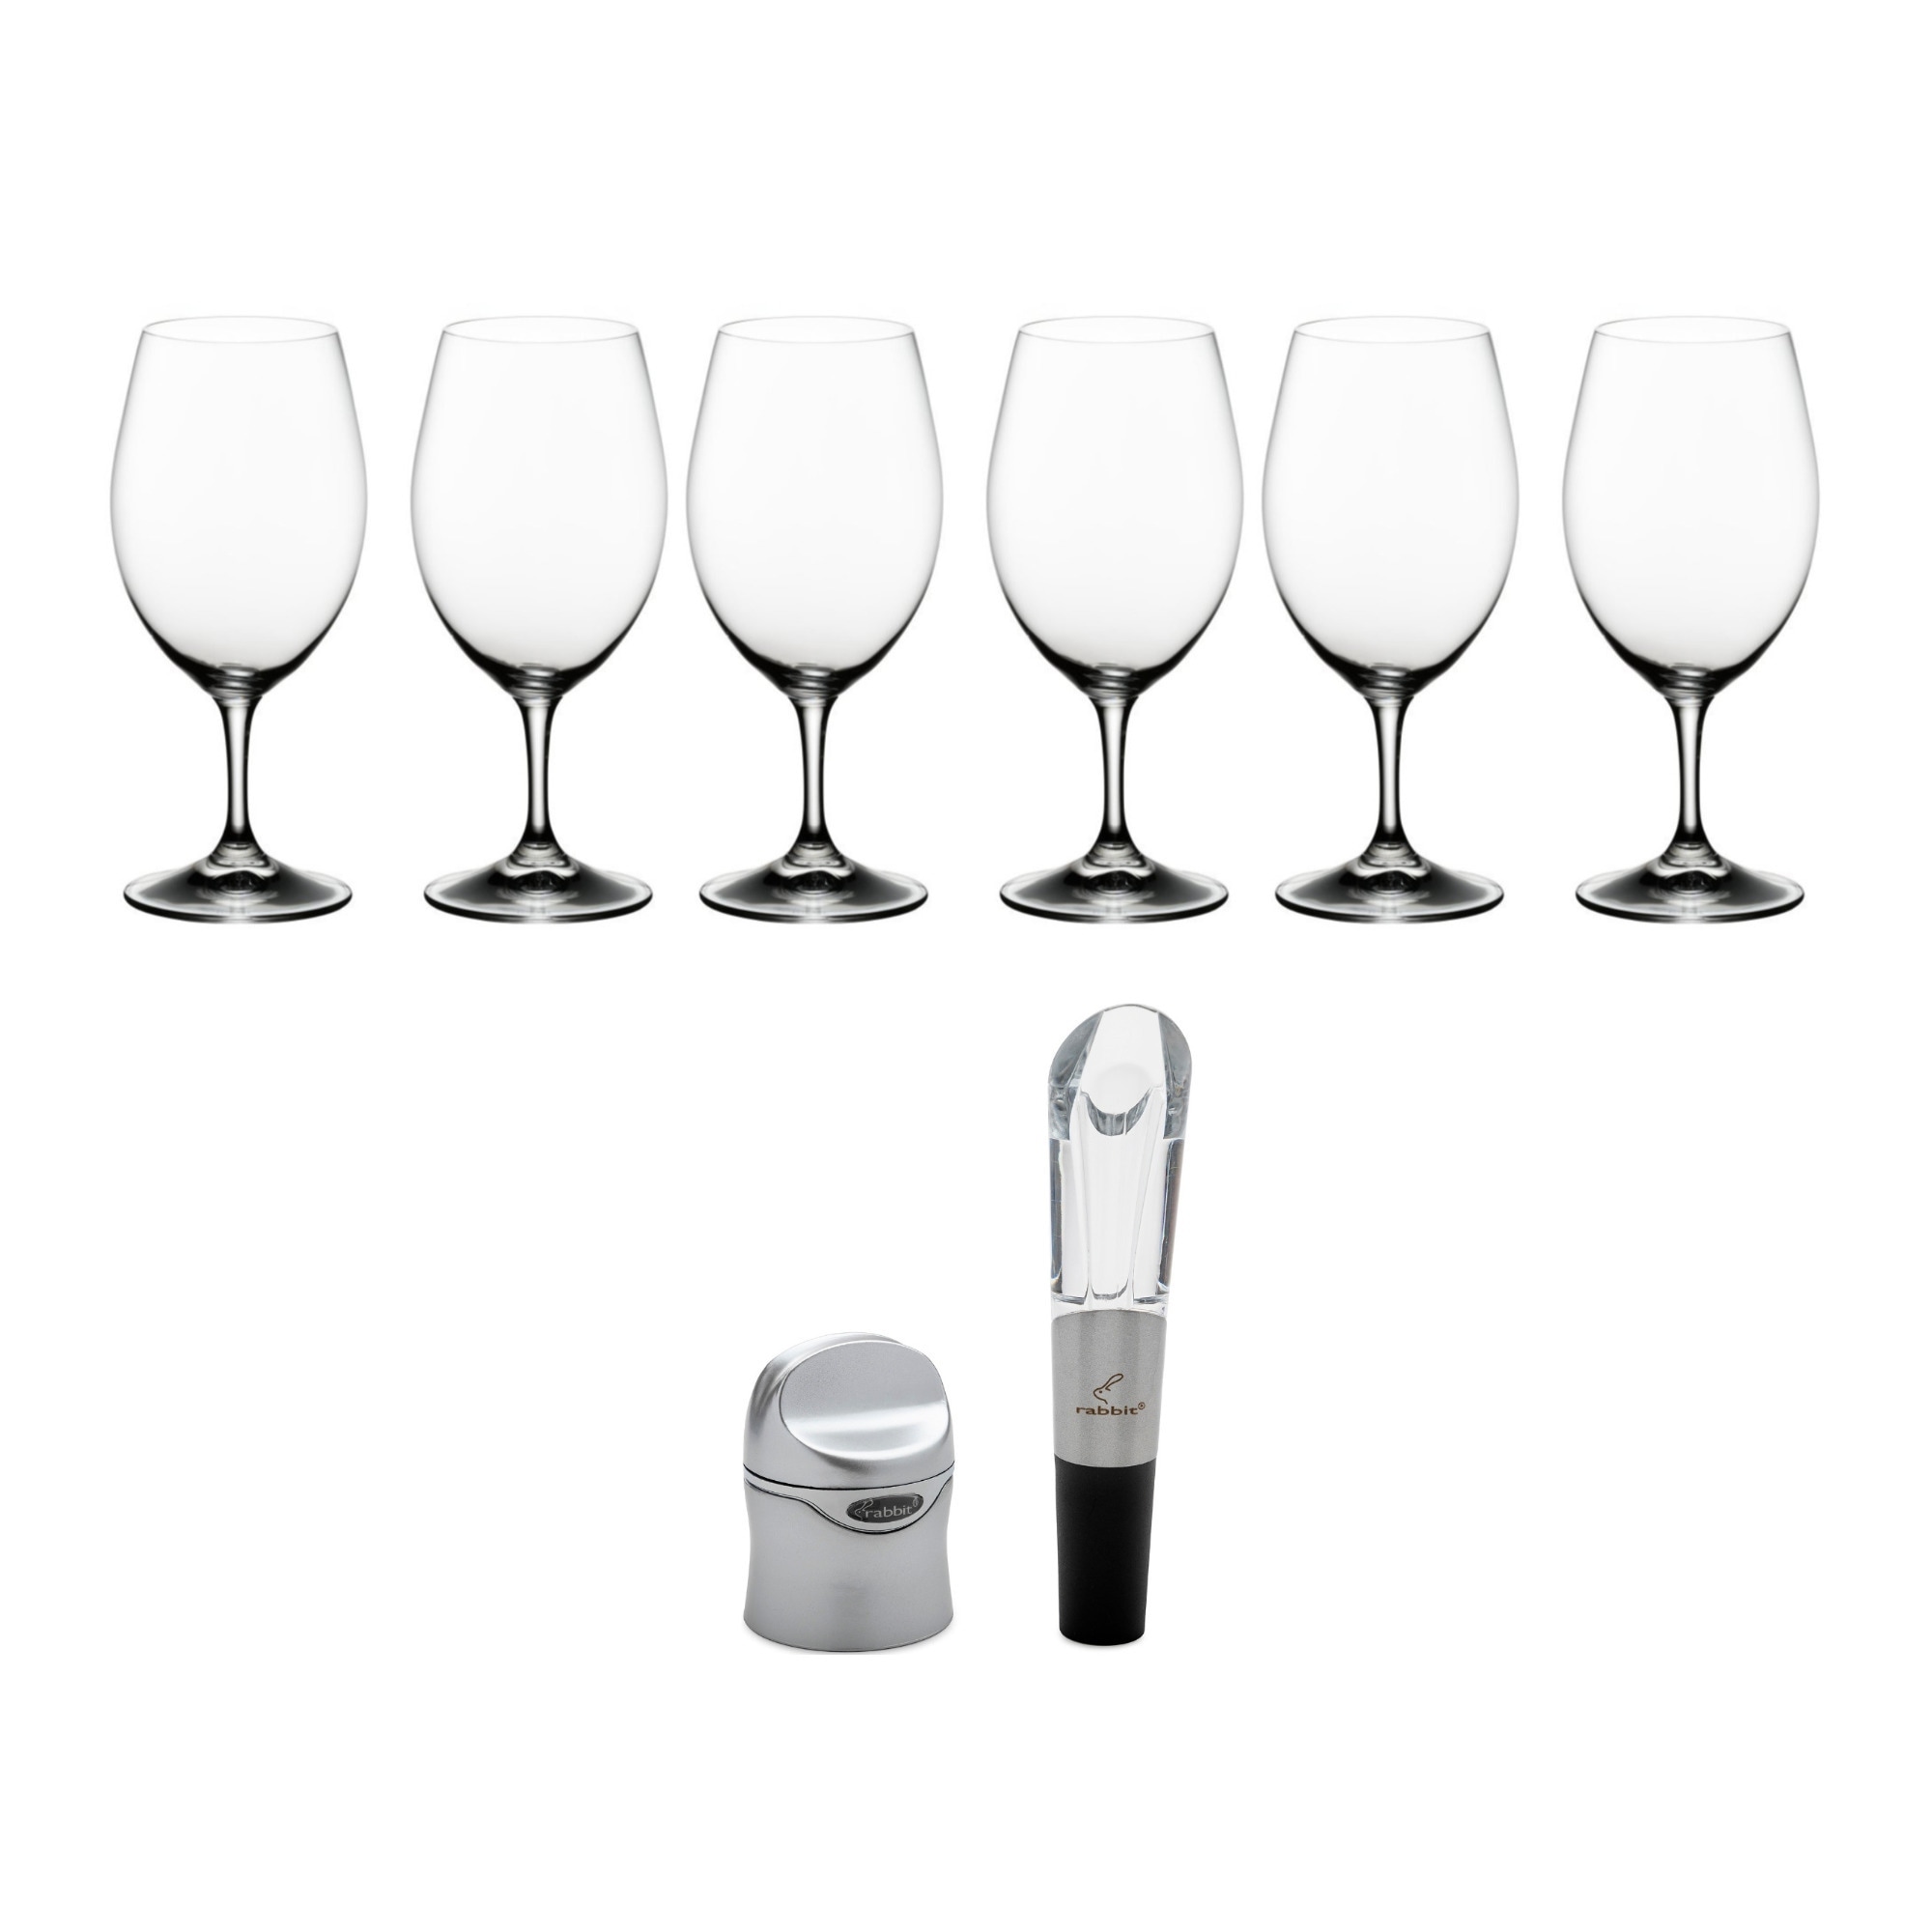 Riedel Ouverture Champagne Glass, Set of 2